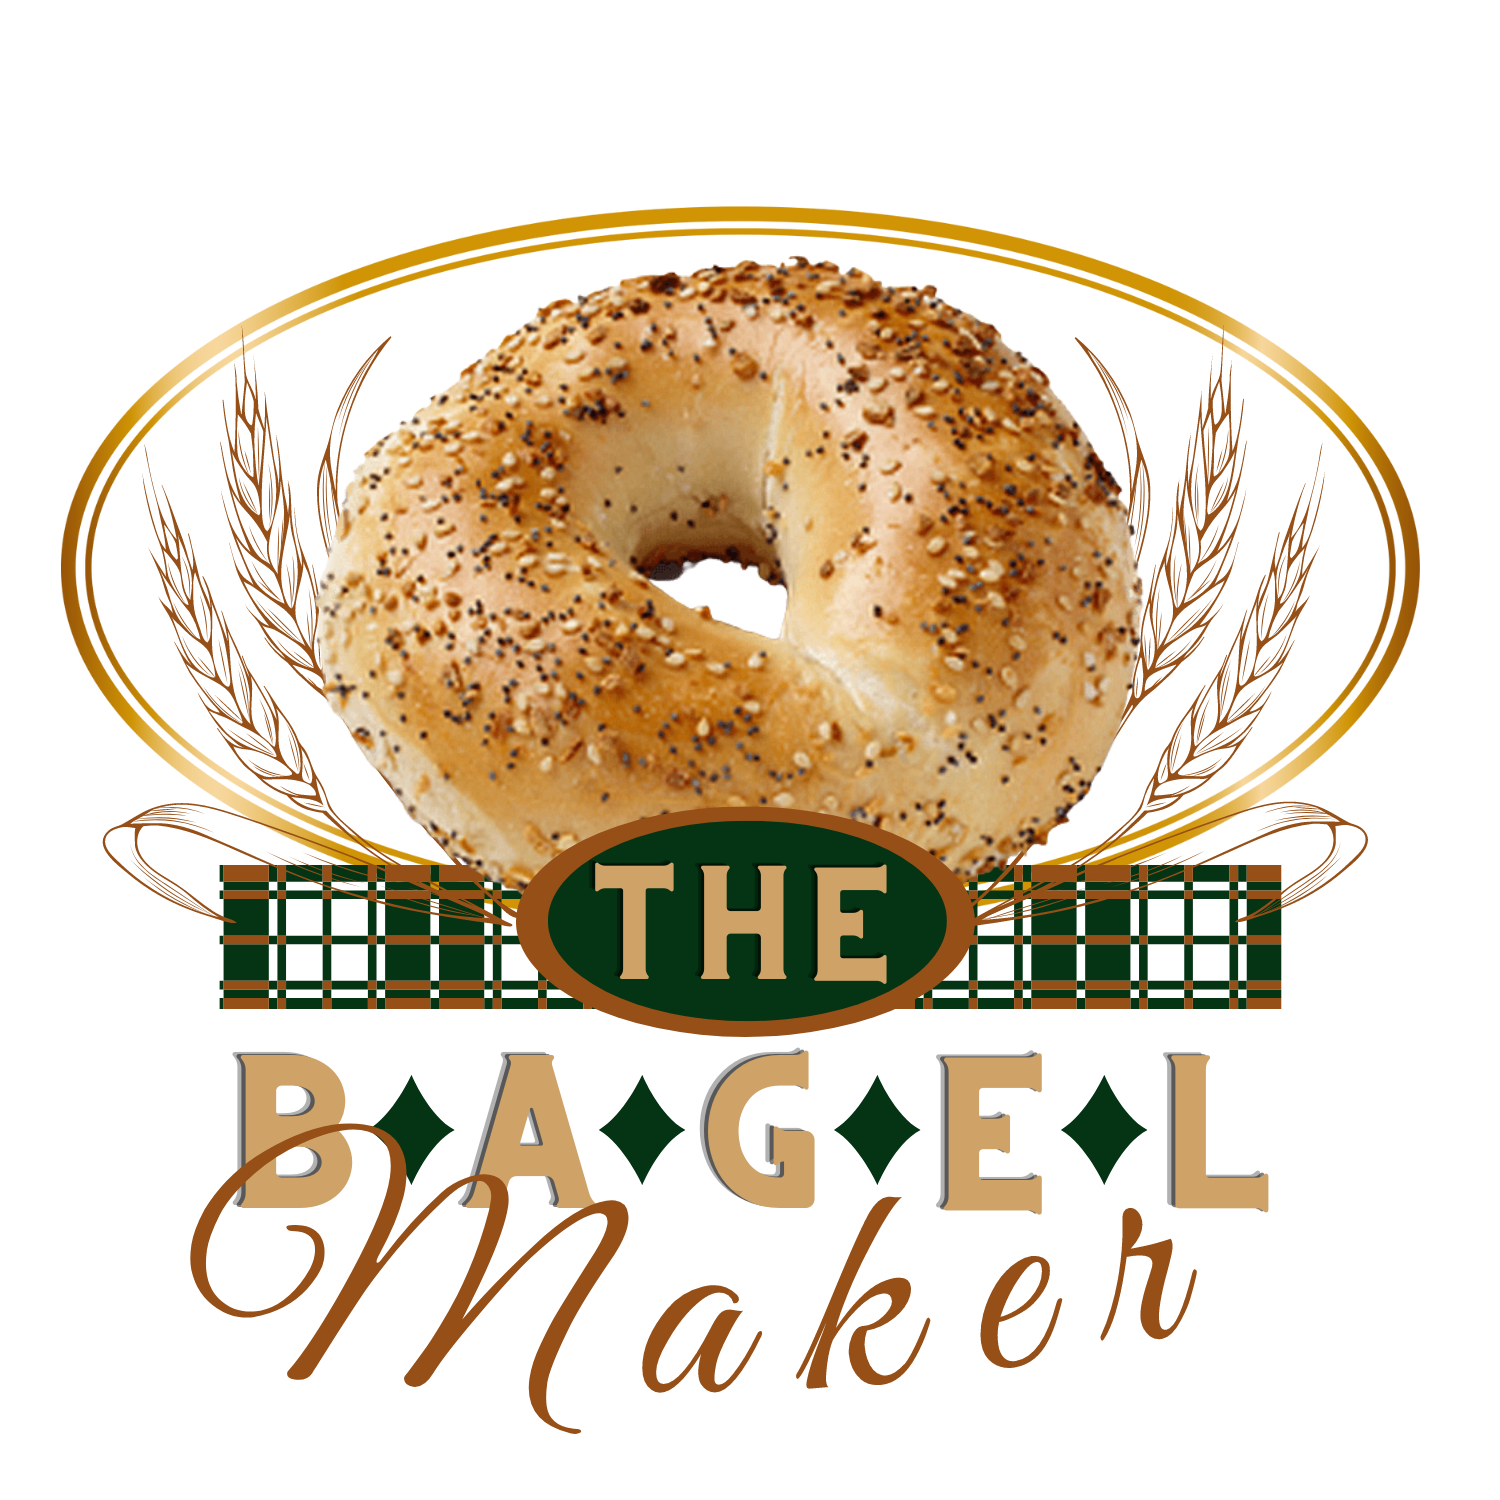 Where or how do I find The Bagel Maker in Panama City FL